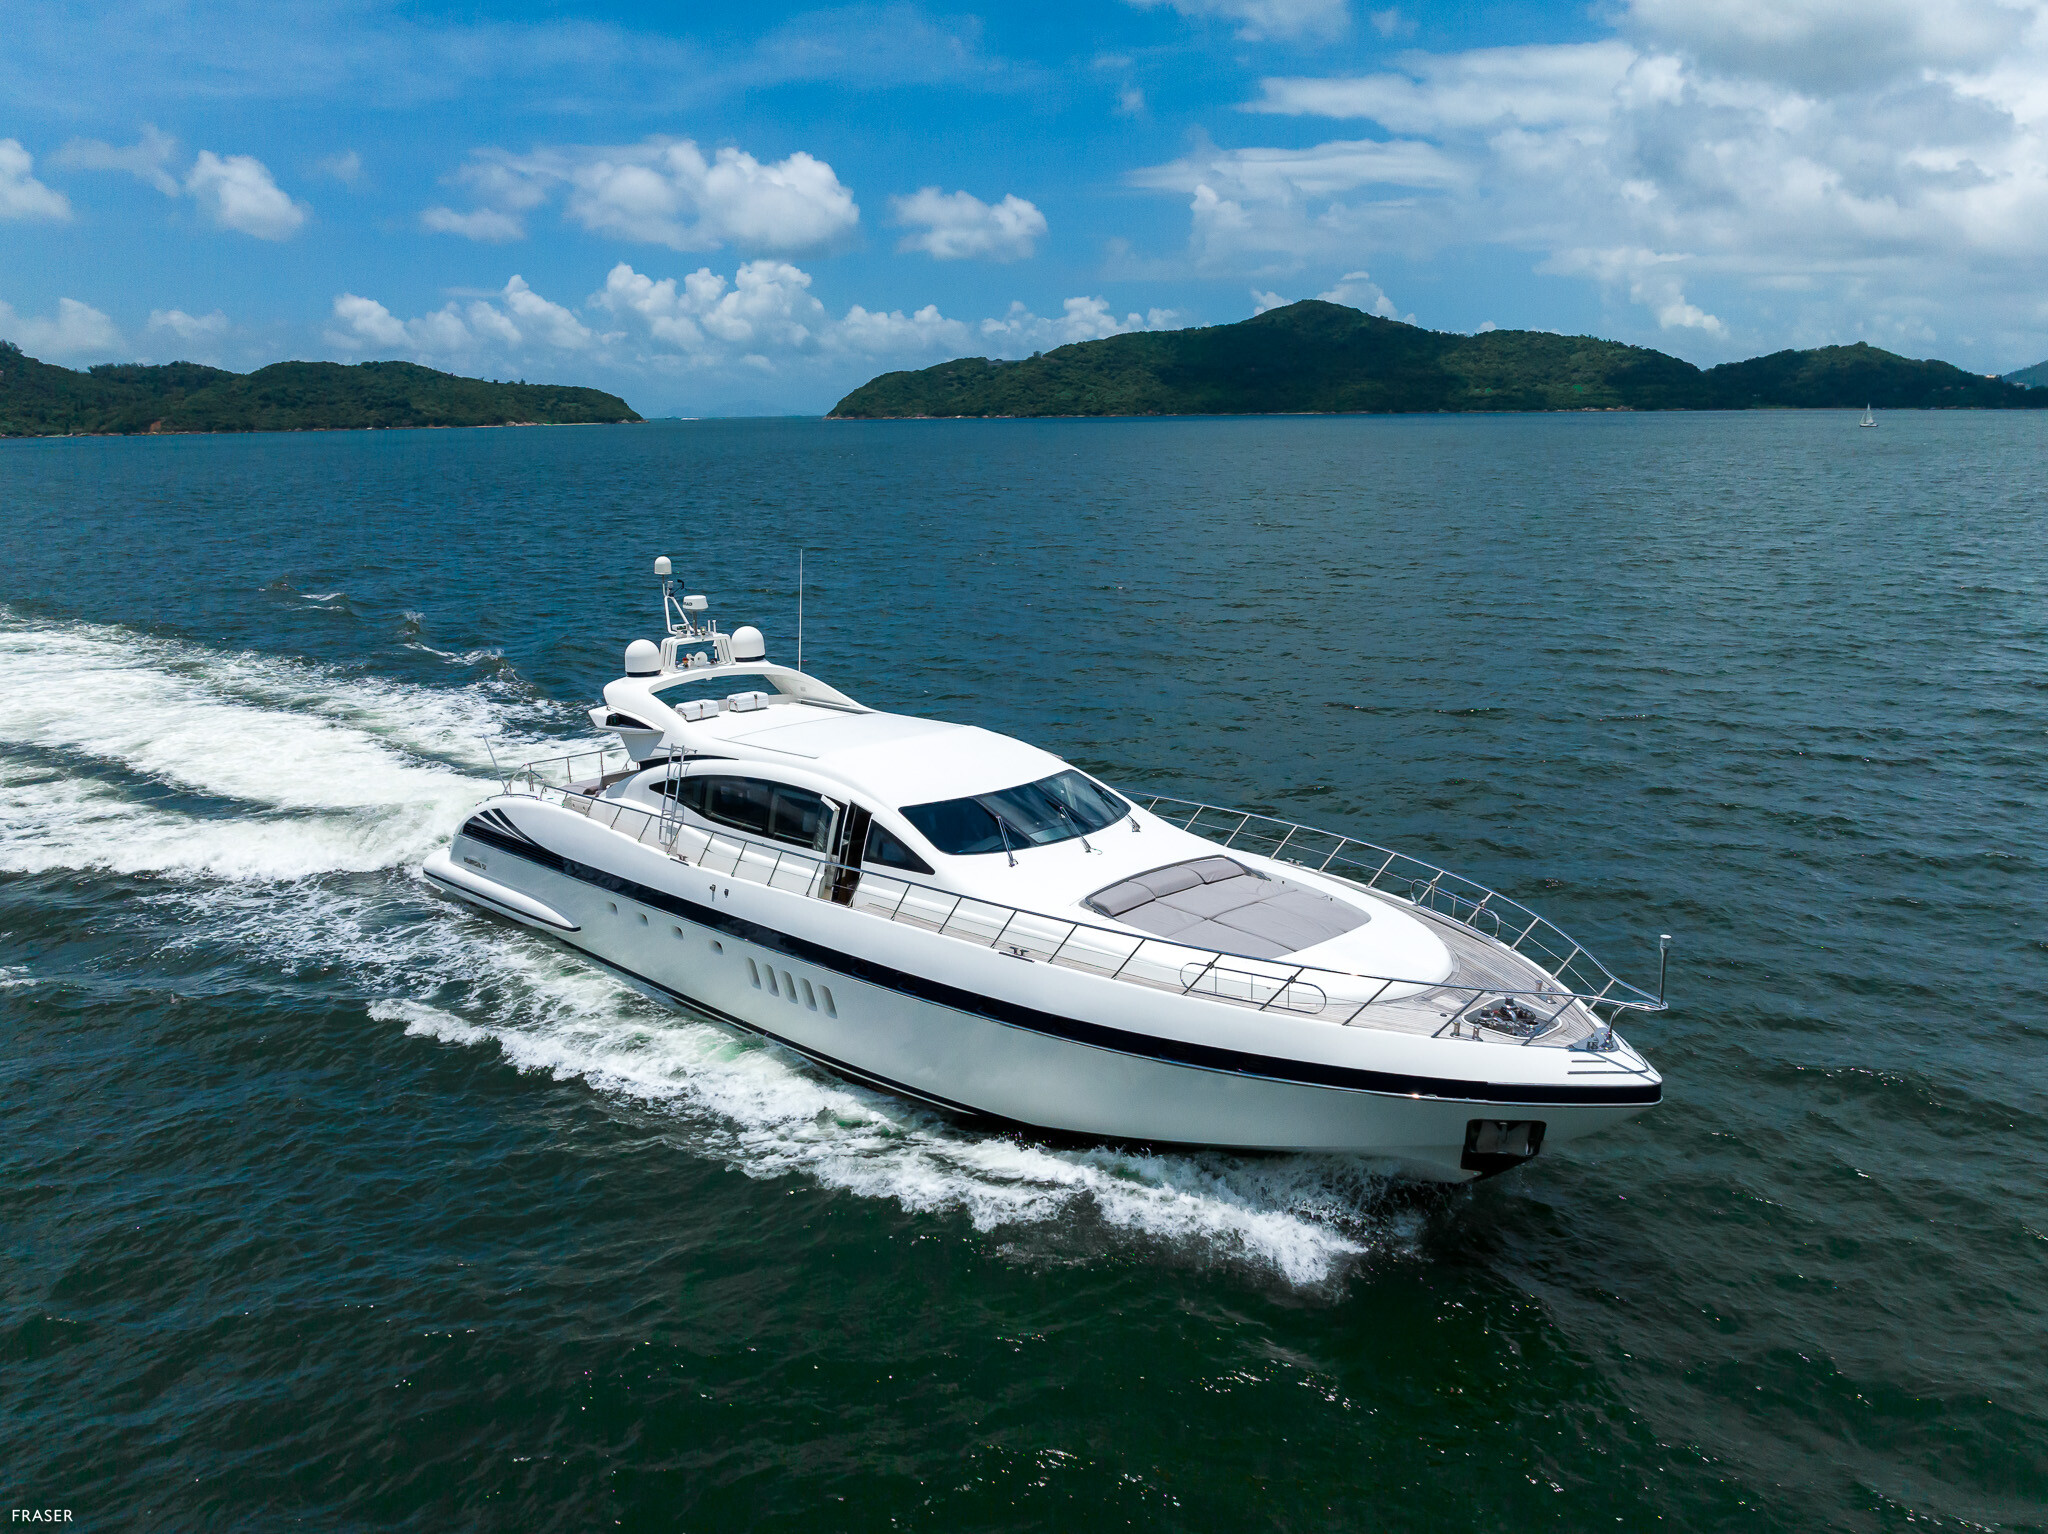 BEAR MARKET motor yacht for sale by FRASER, built by Overmarine